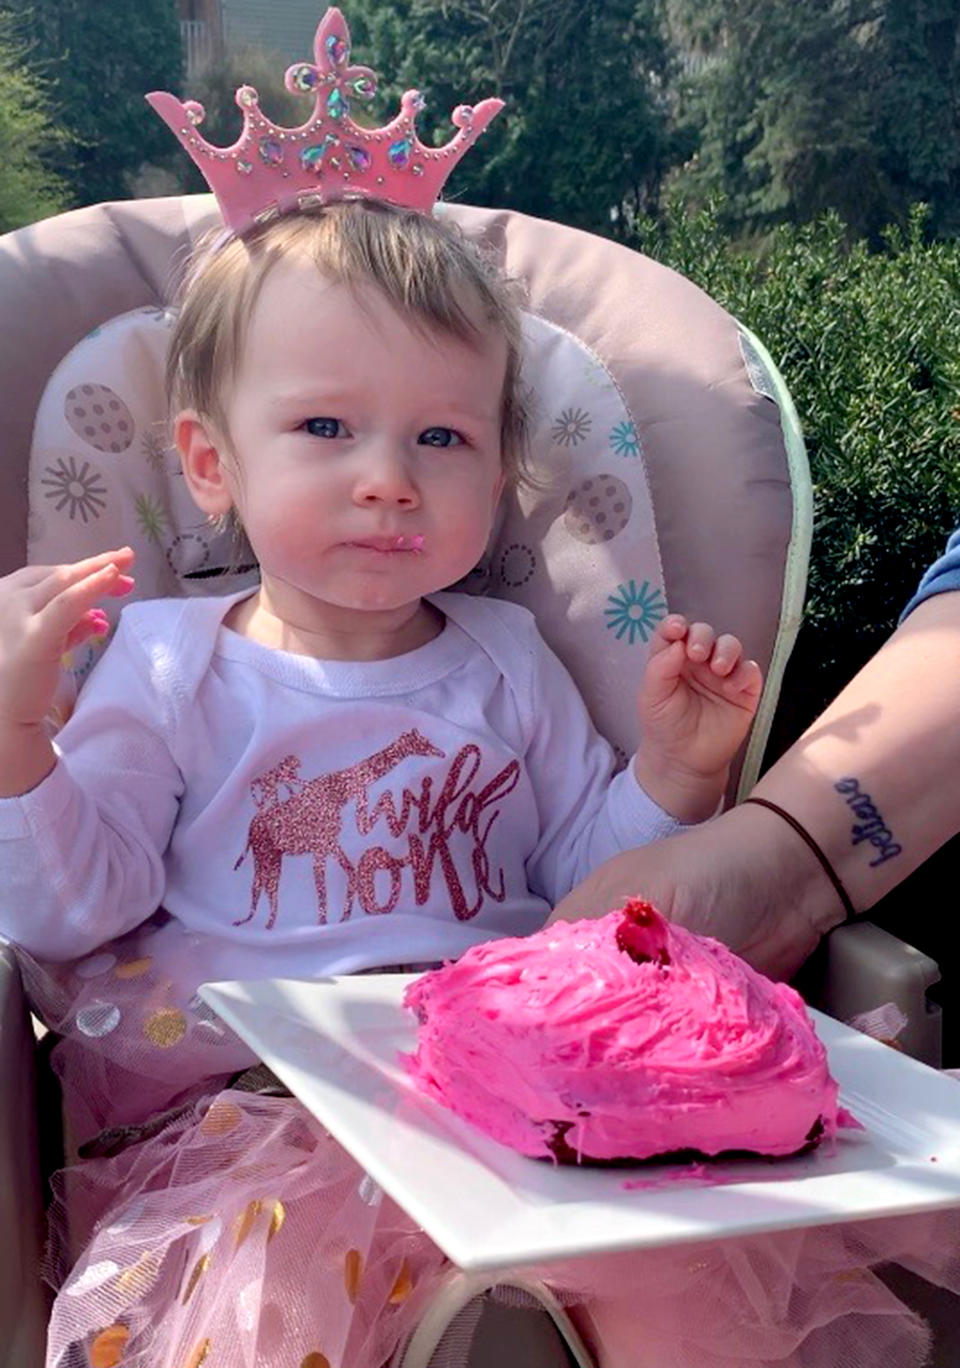 Becca Gregory had planned a big party for Luna's first birthday, including a beautiful animal smash cake. But the coronavirus pandemic meant she had to cancel it and instead make a cake from a box. Luna still loved it.  (Courtesy Becca Gregory)